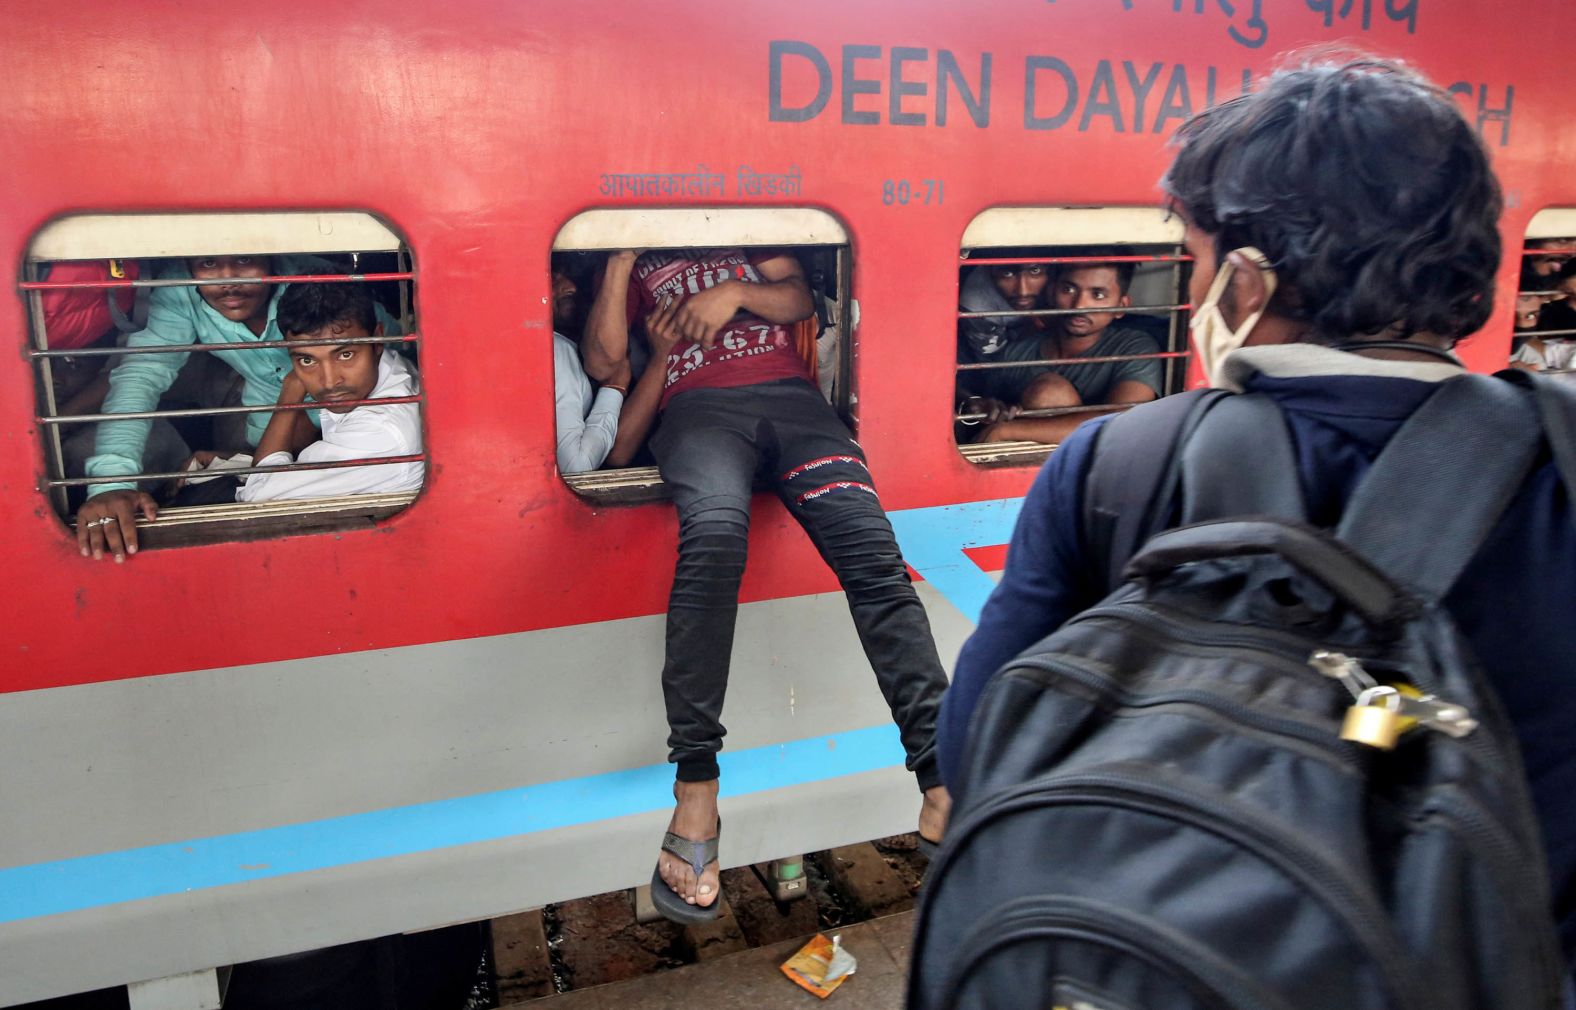 A migrant worker attempts to board an overcrowded train in Mumbai.